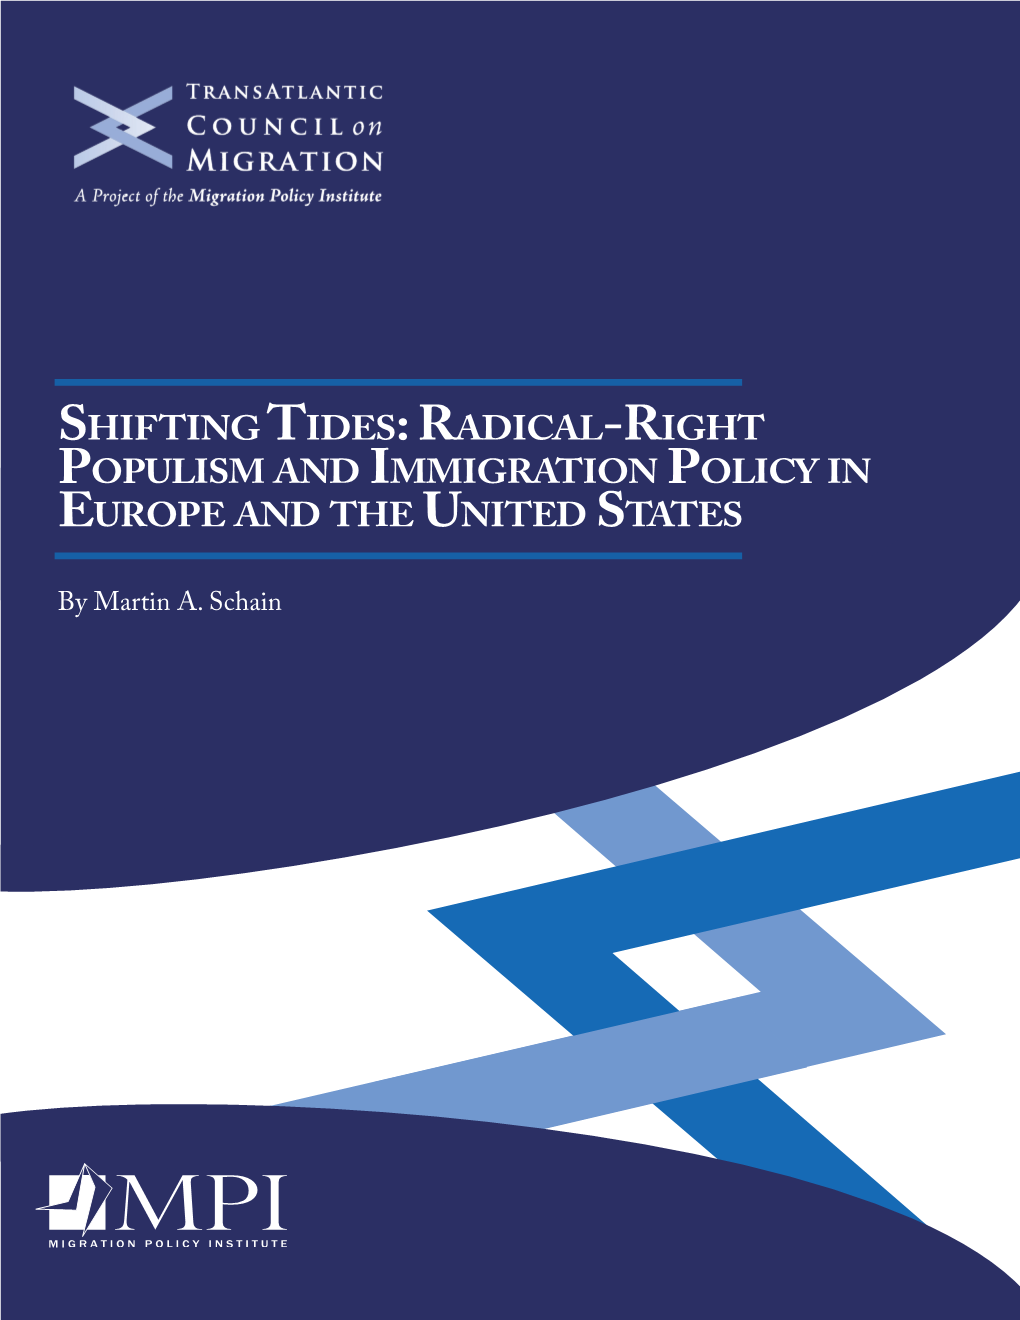 Shifting Tides: Radical-Right Populism and Immigration Policy in Europe and the United States